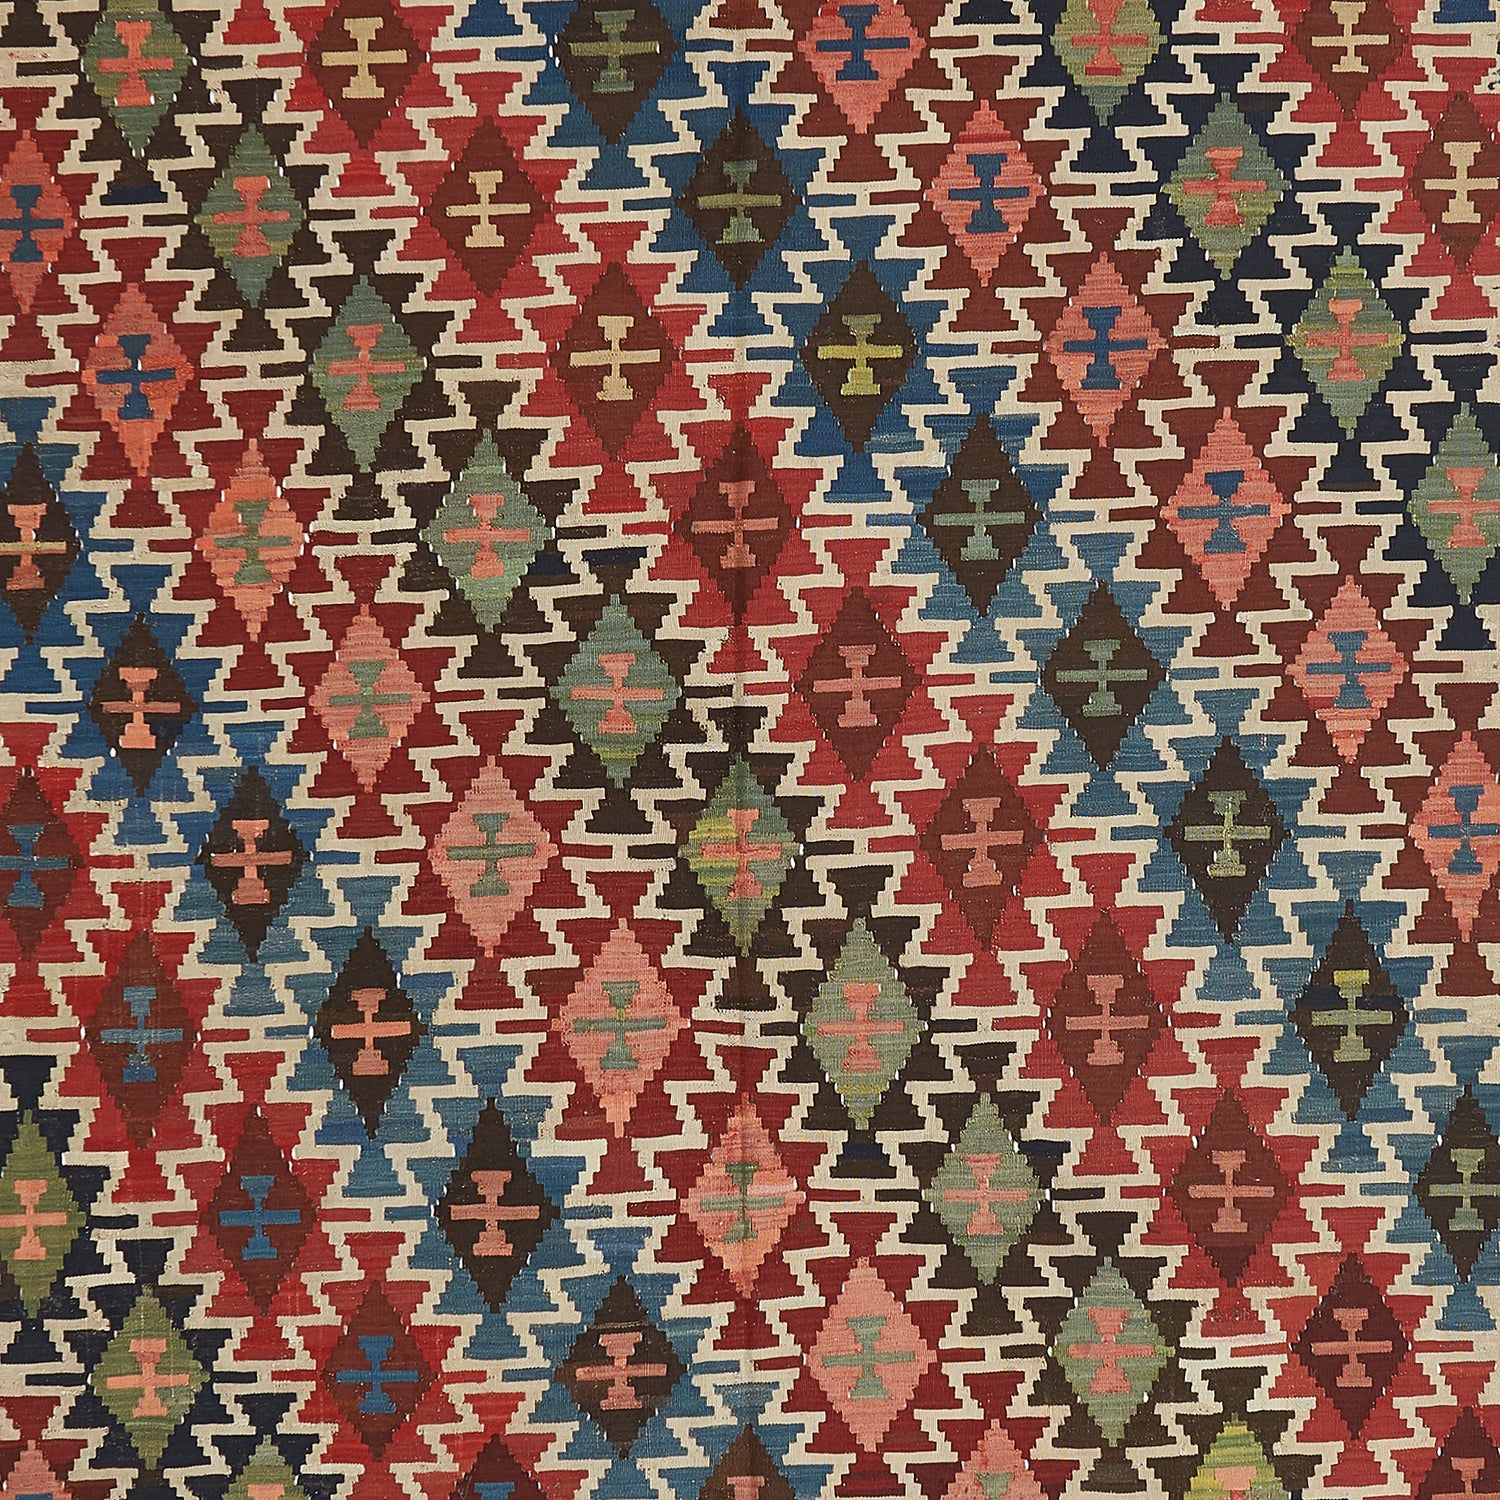 Vibrant and intricate textile with symmetrical geometric pattern and motifs.